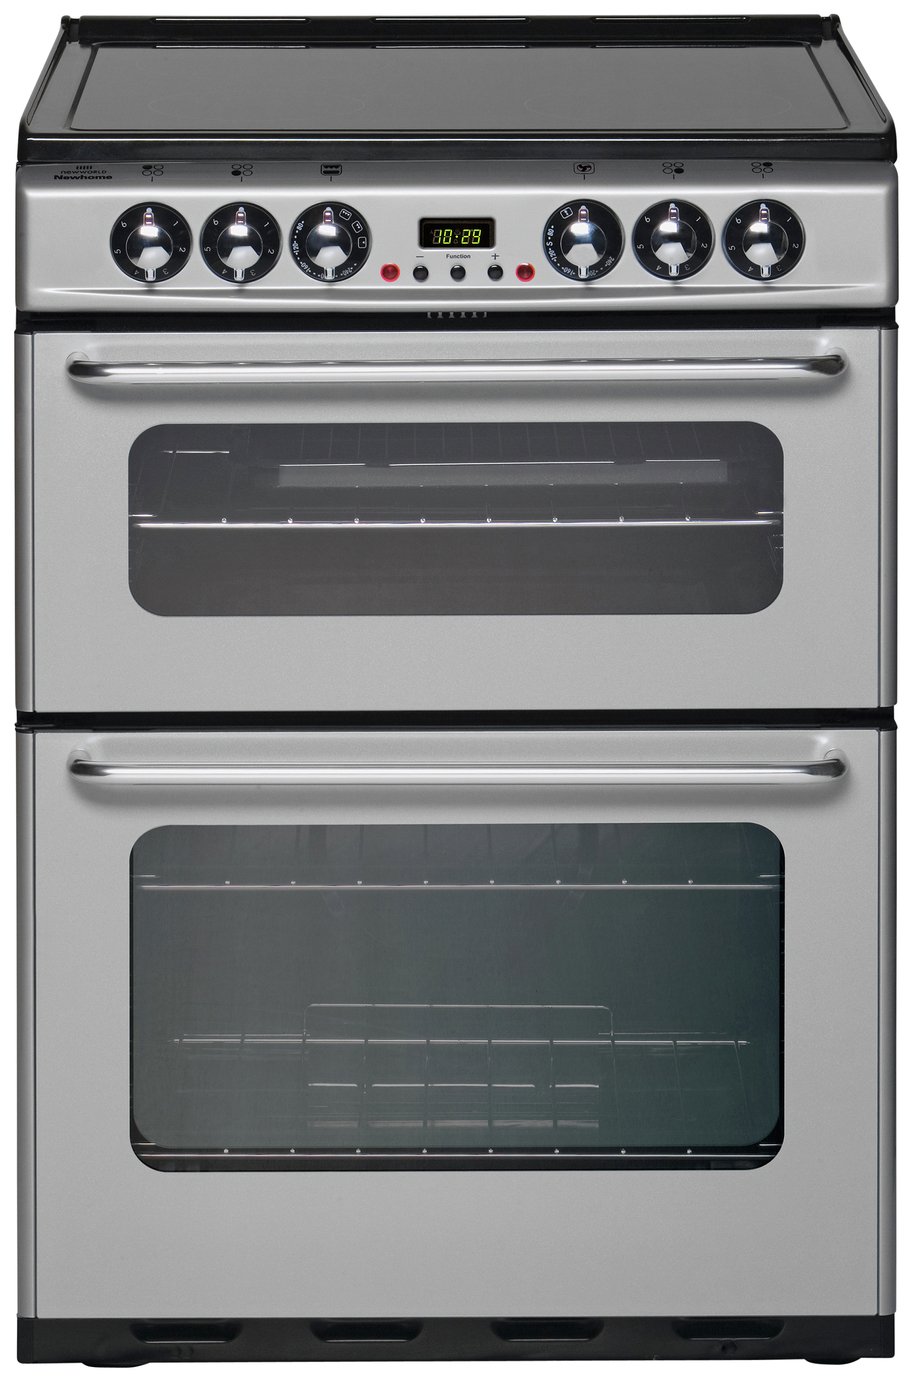 New World EC600DOm Double Electric Cooker - Silver